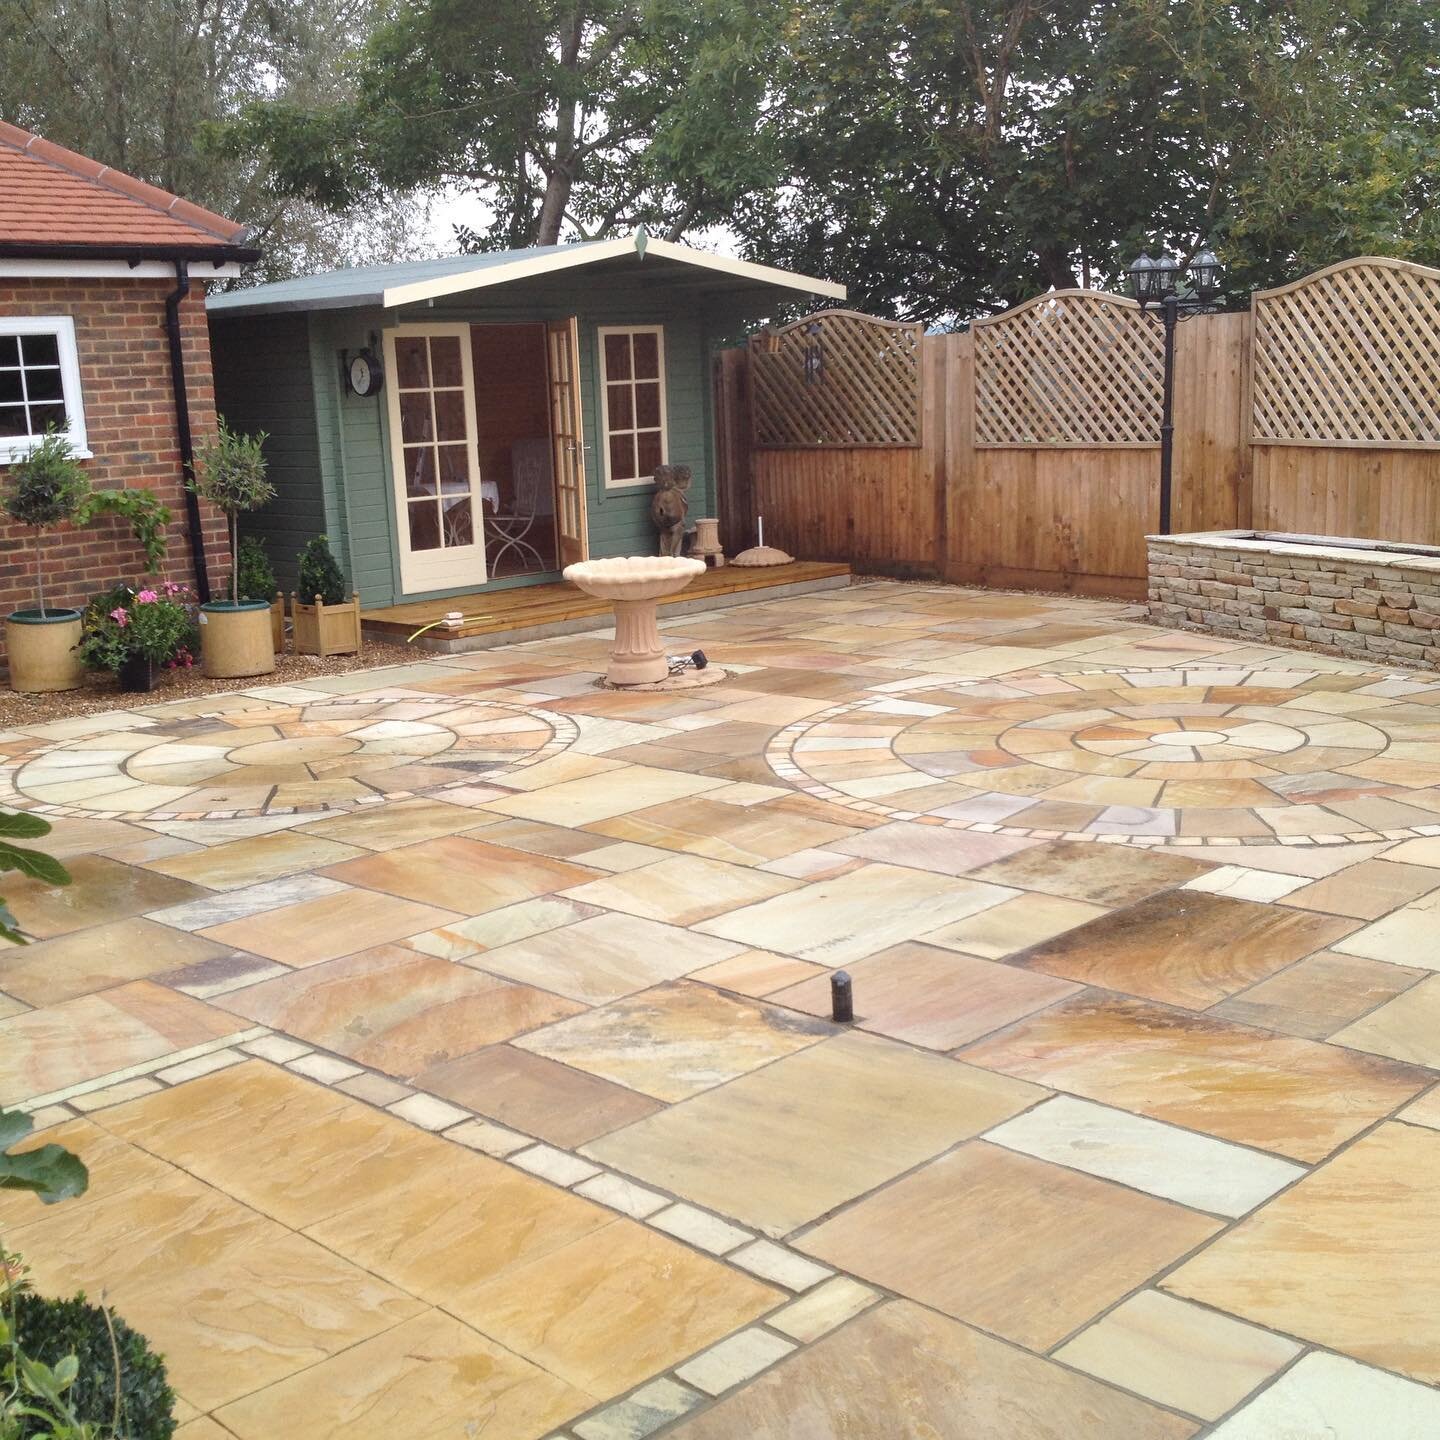 Compleated #mint #fossil #Indian #sandstone #patio in #uckfield #eastsussex  #patiodesign #creativity #hardwork #craftmanship #patiodecor #lowmaintenancegarden So today is #crane day, the big lift. www.pnlandscapes.co.uk